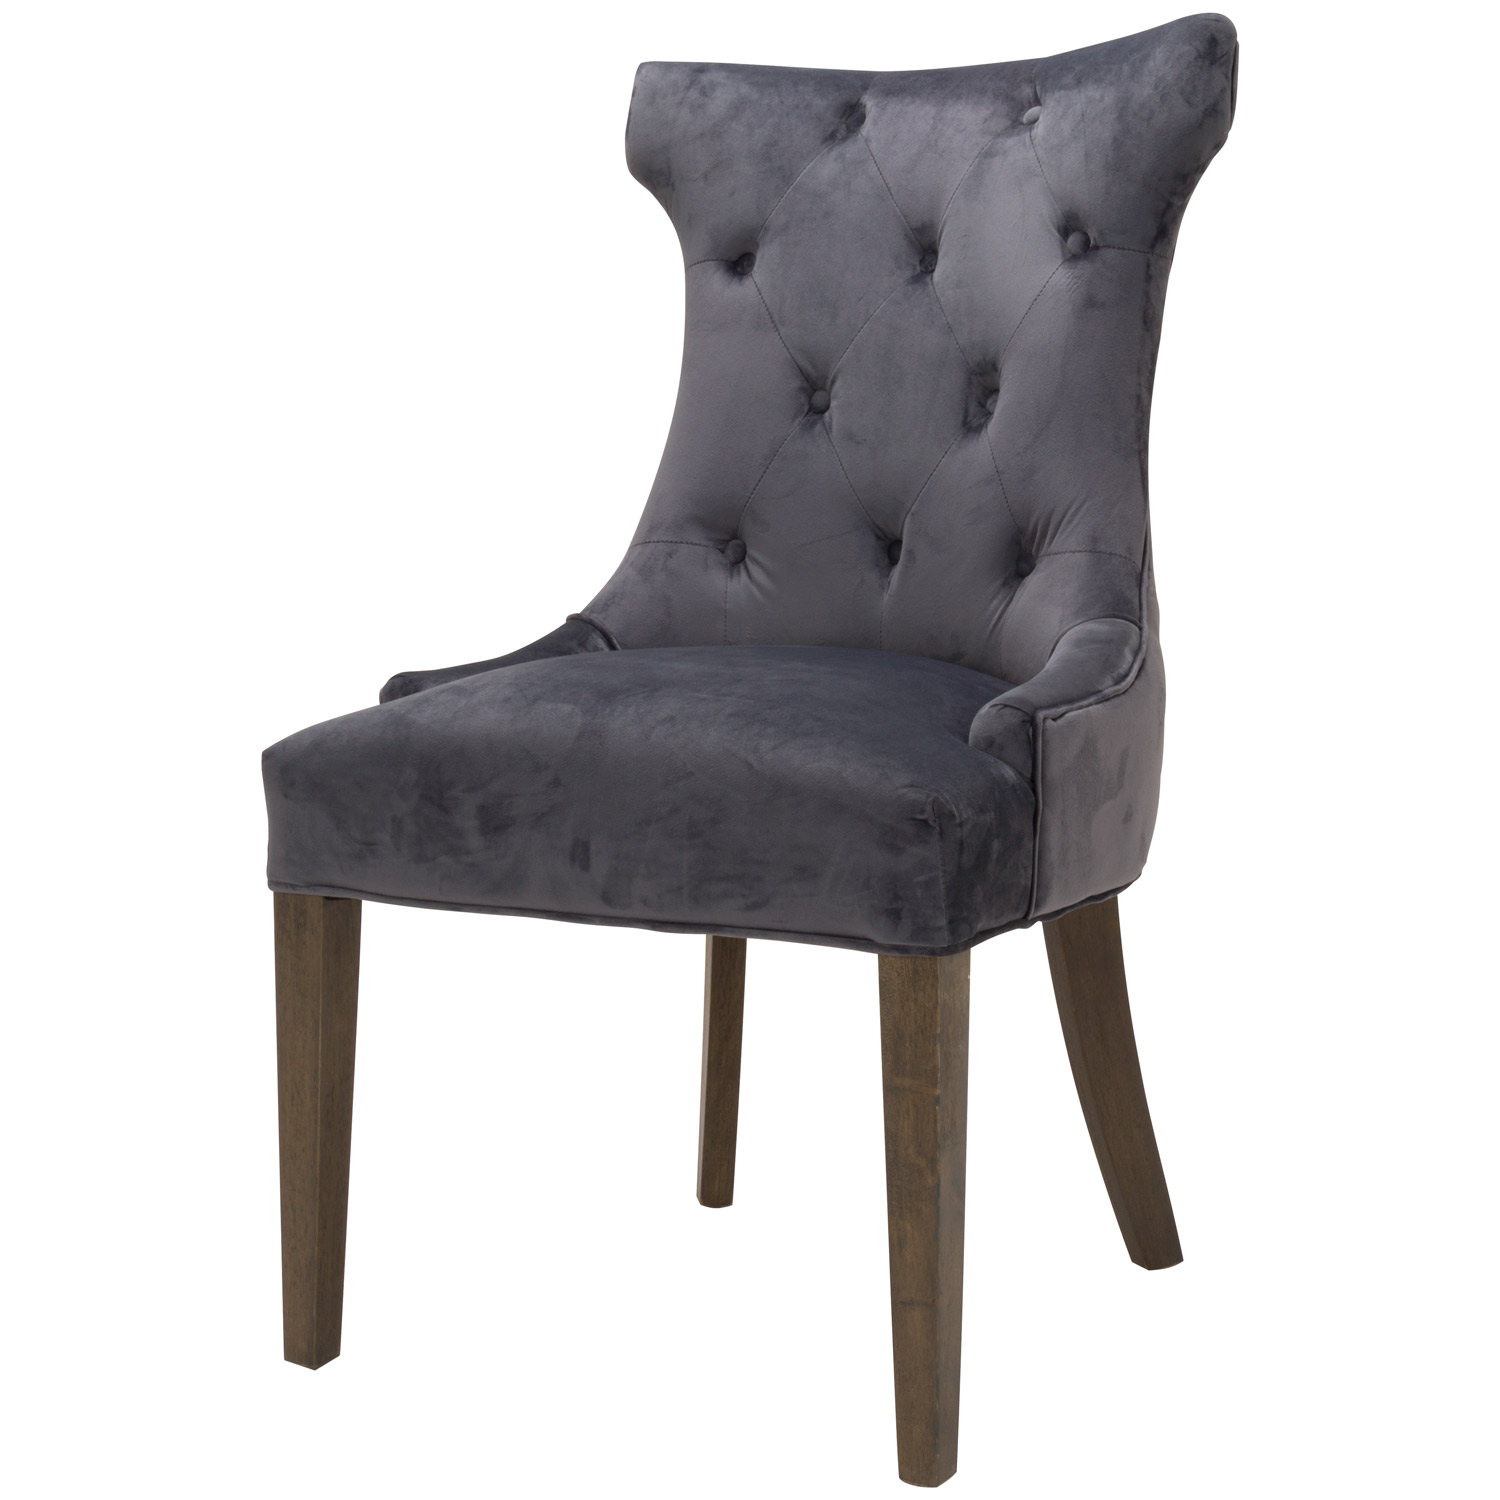 Knightsbridge High Wing Ring Backed Dining Chair - Image 1